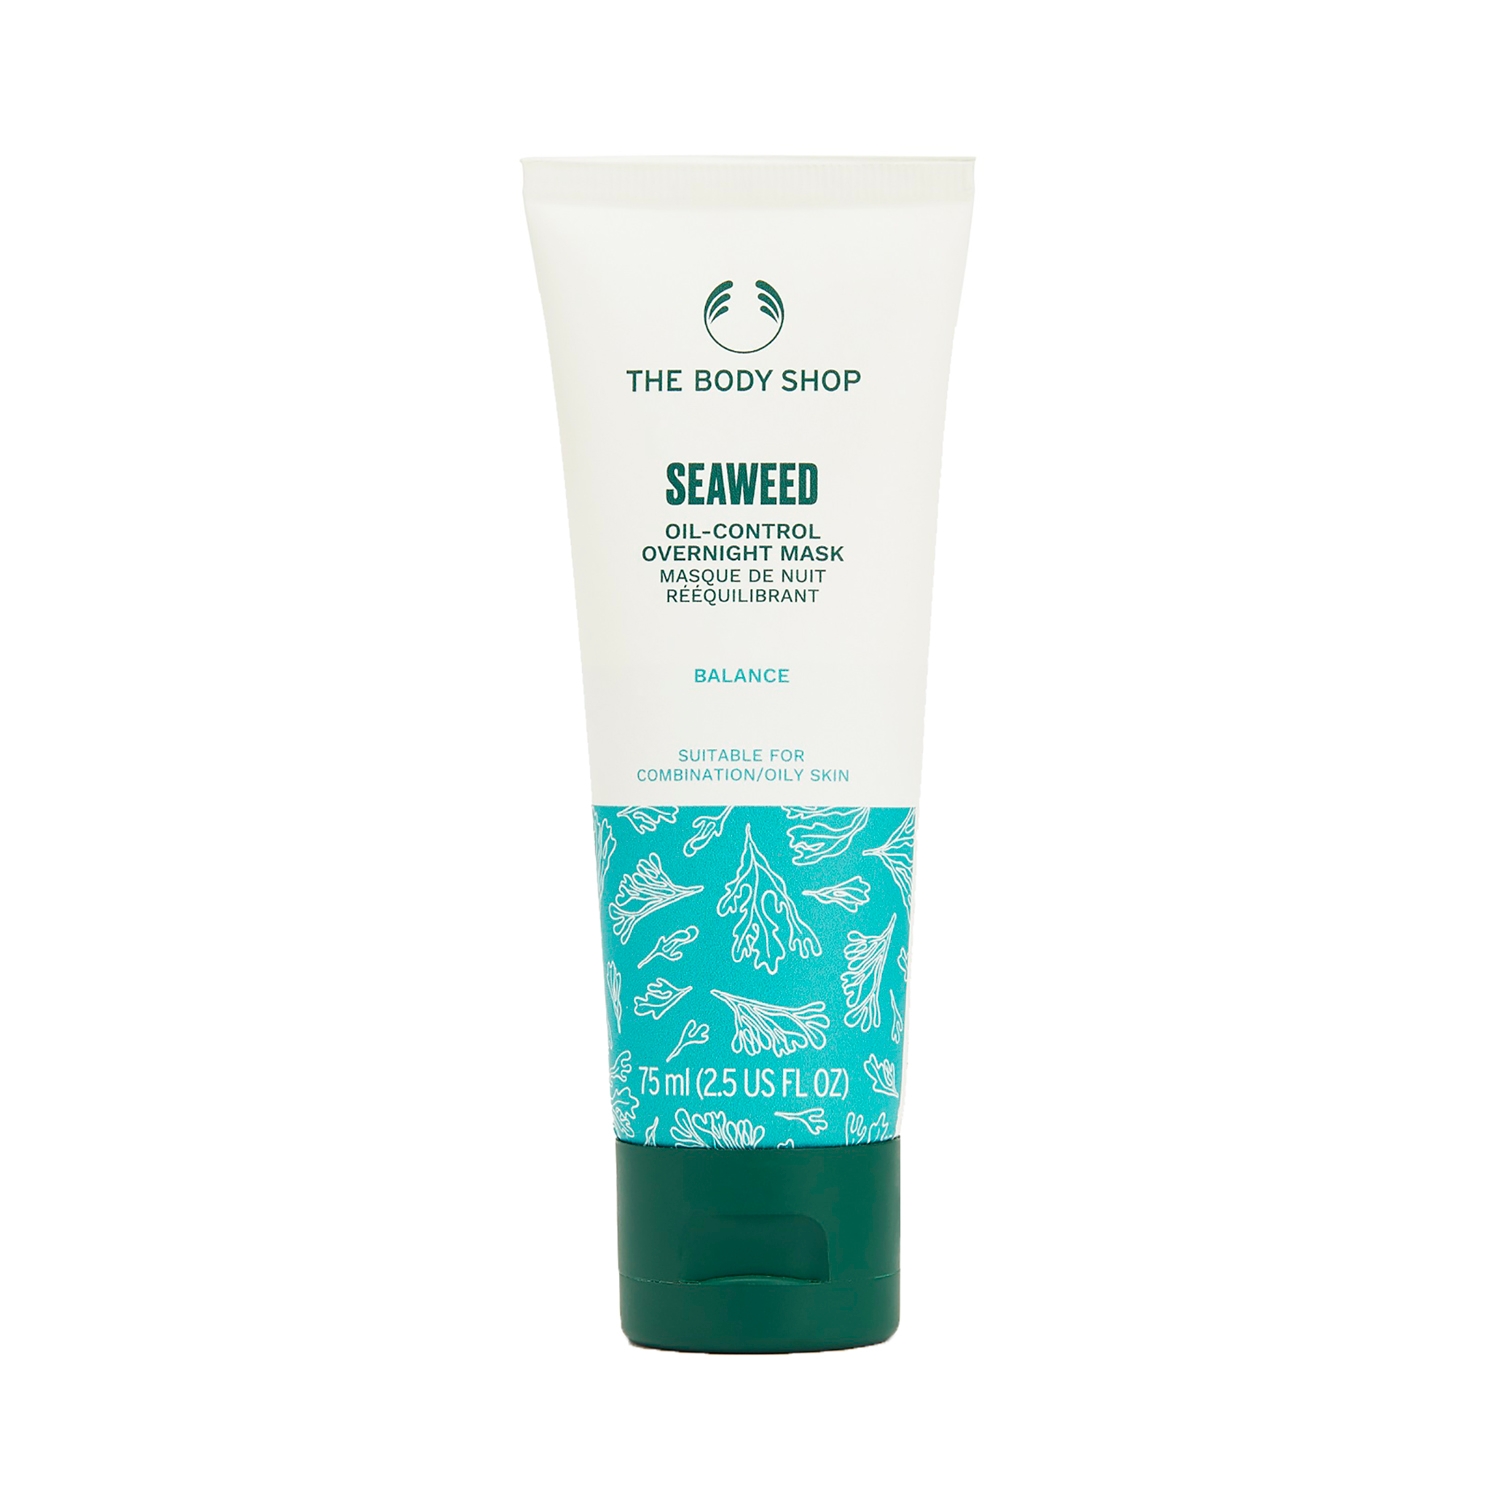 The Body Shop | The Body Shop Seaweed Oil-Control Overnight Mask (75ml)